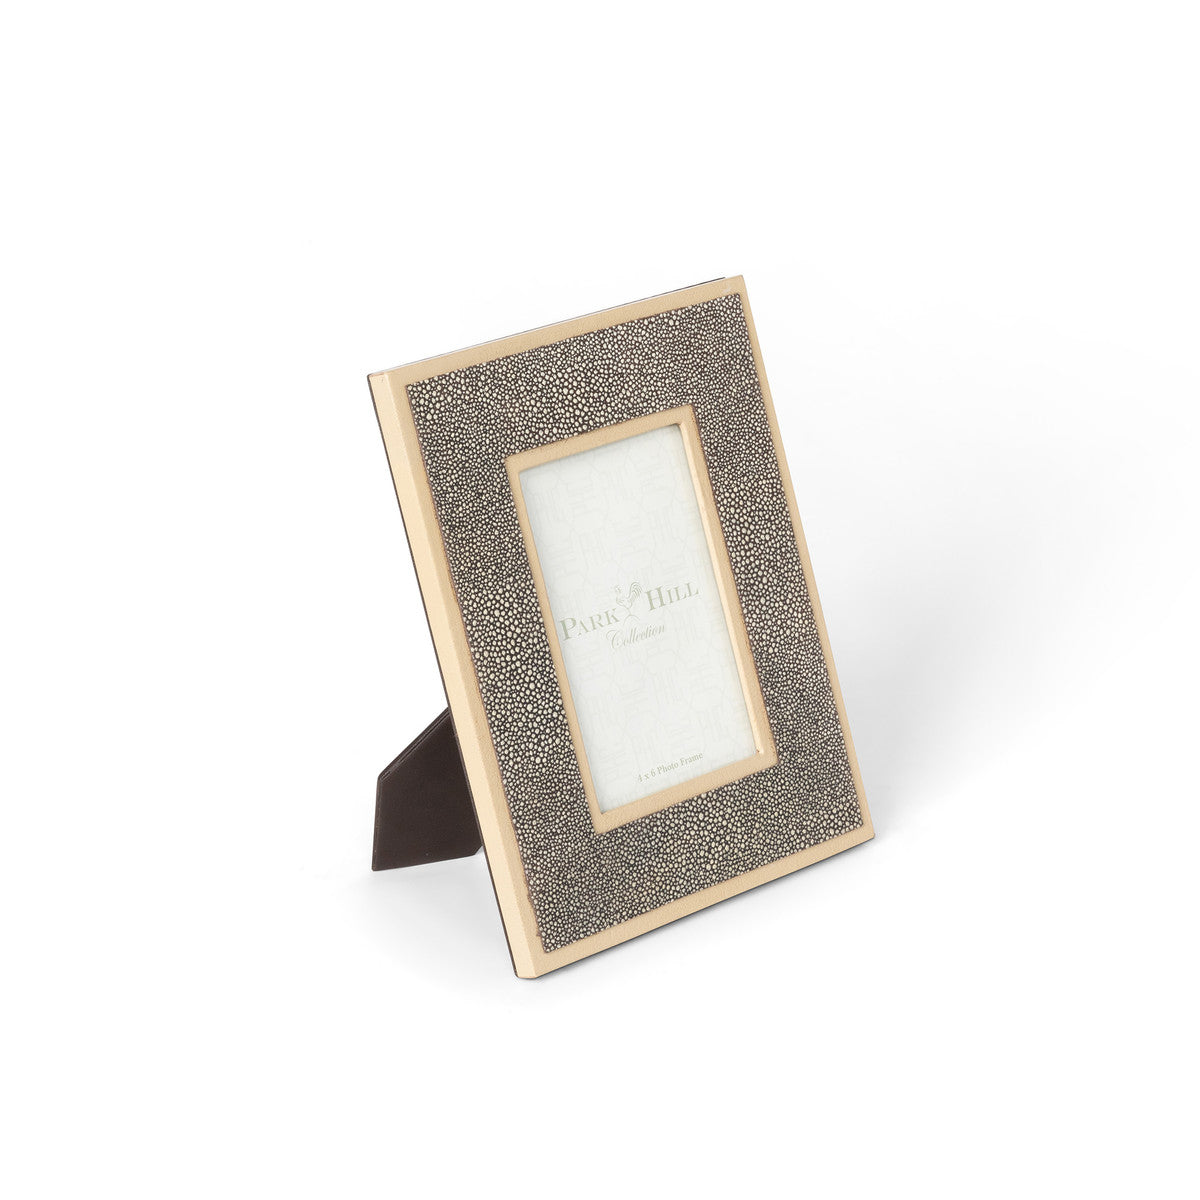 Shagreen Pattern Leather Photo Frame - Small